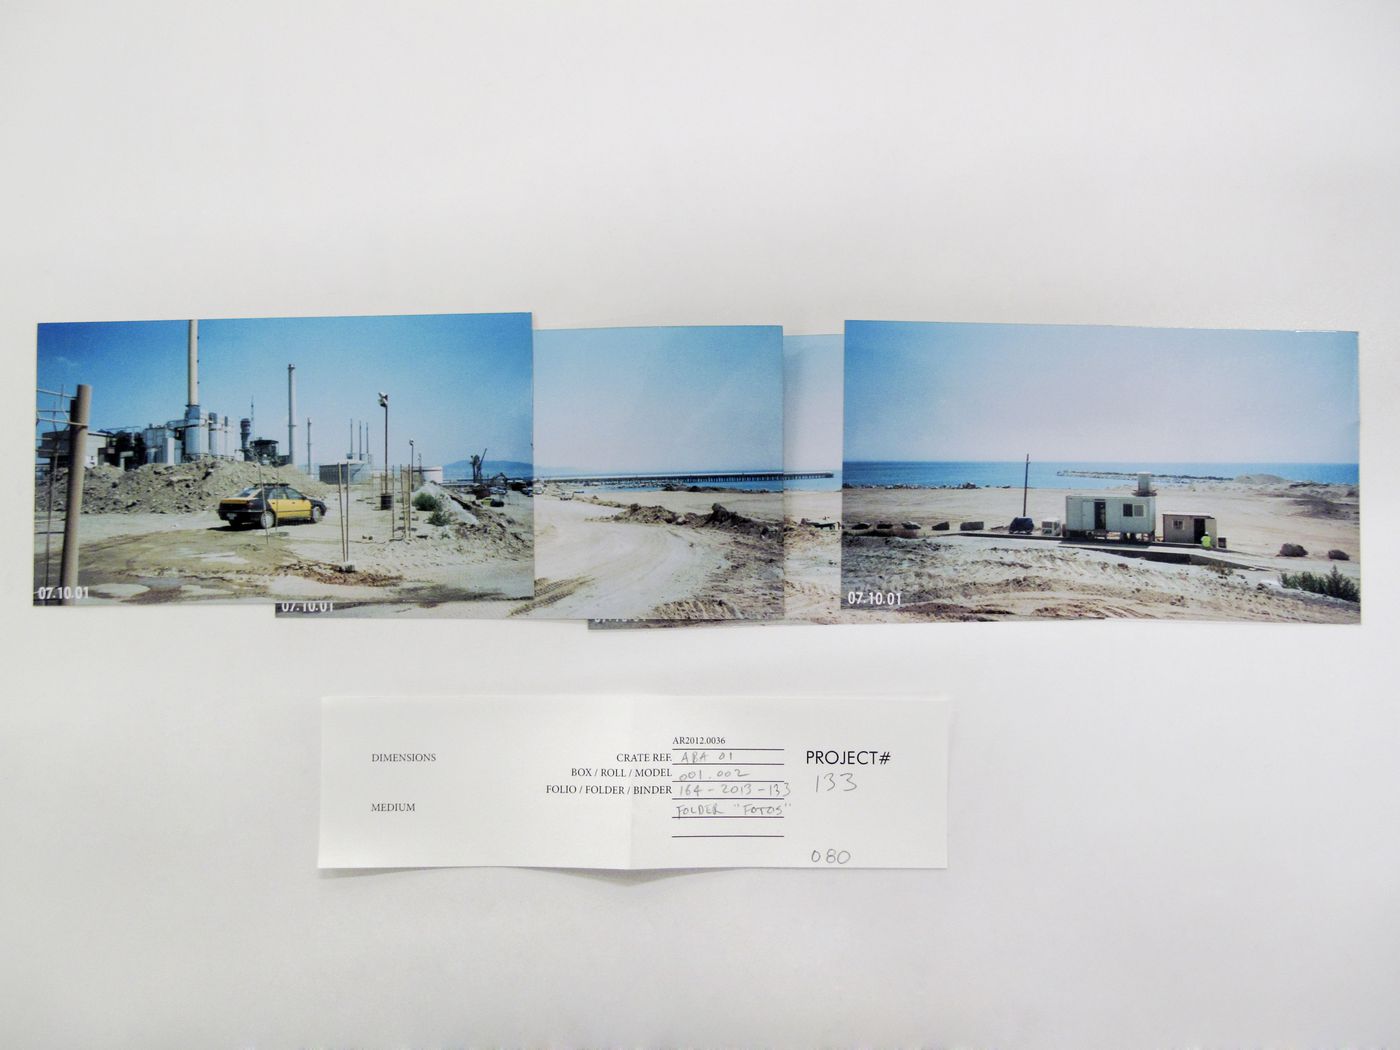 Photomontage of views of the site for the Parque litoral nord-est, Fòrum 2004, Barcelona, Spain